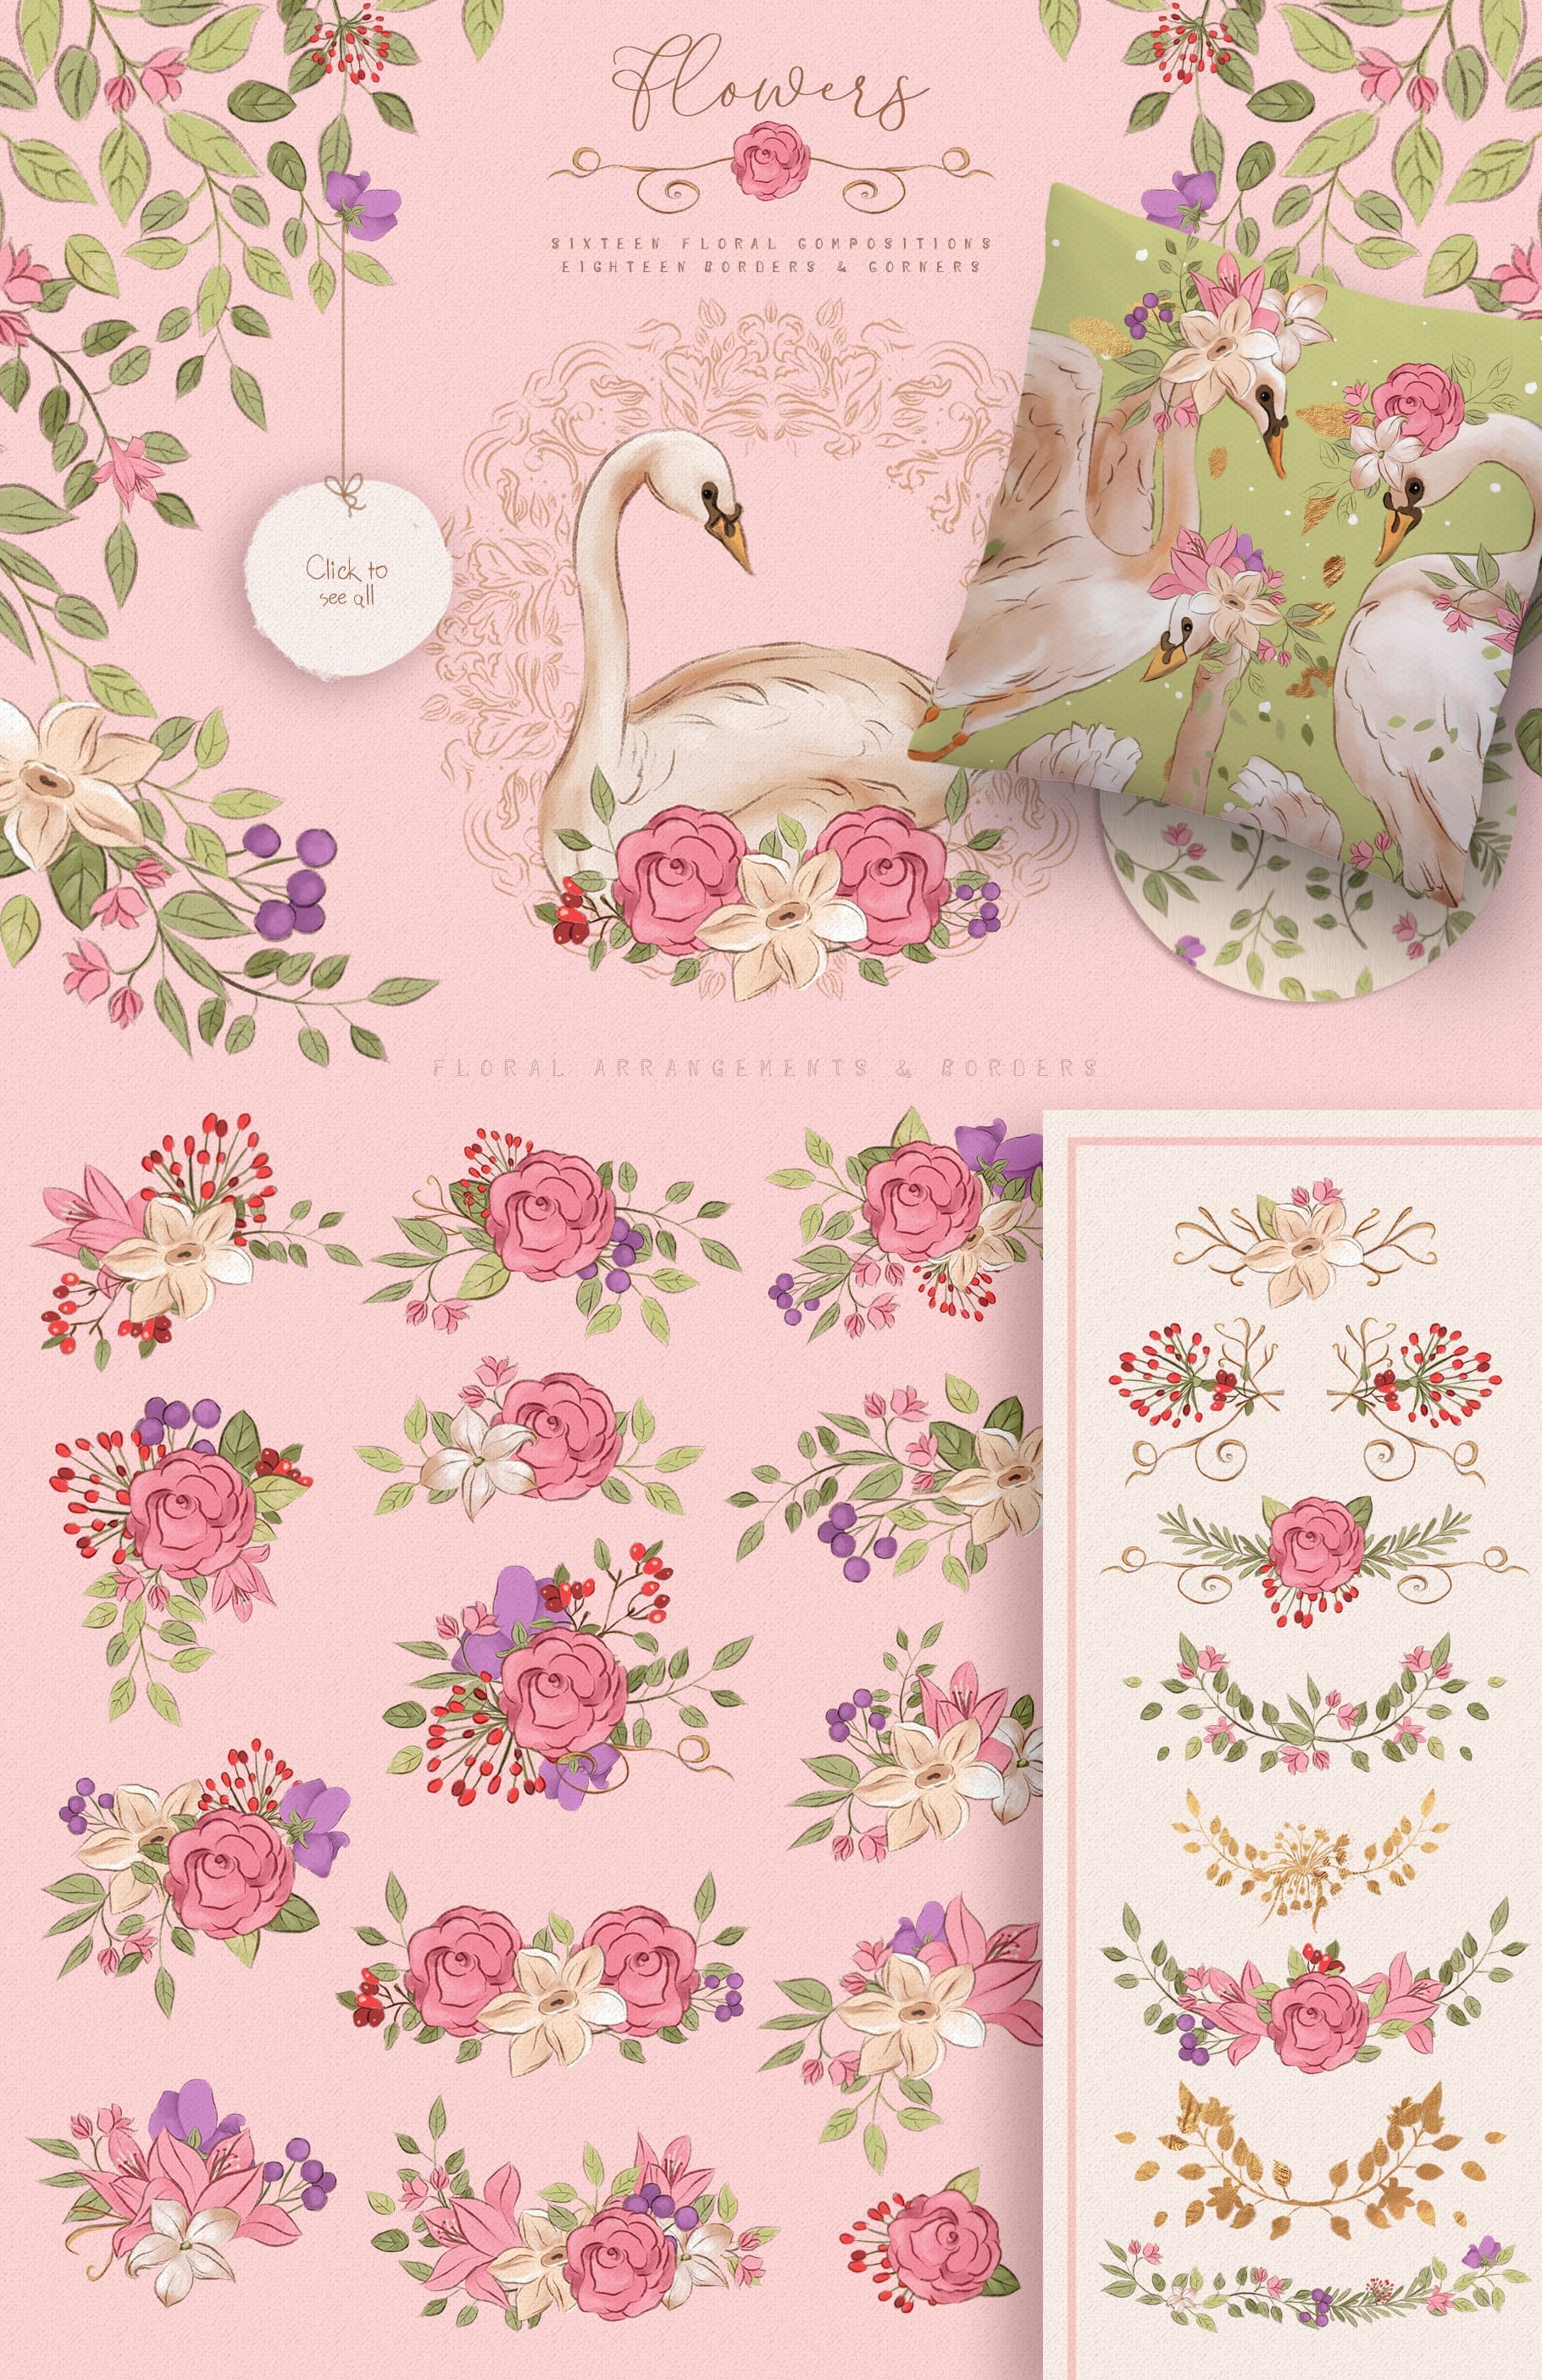 This princess swan collection is a perfect choice for some magic project.